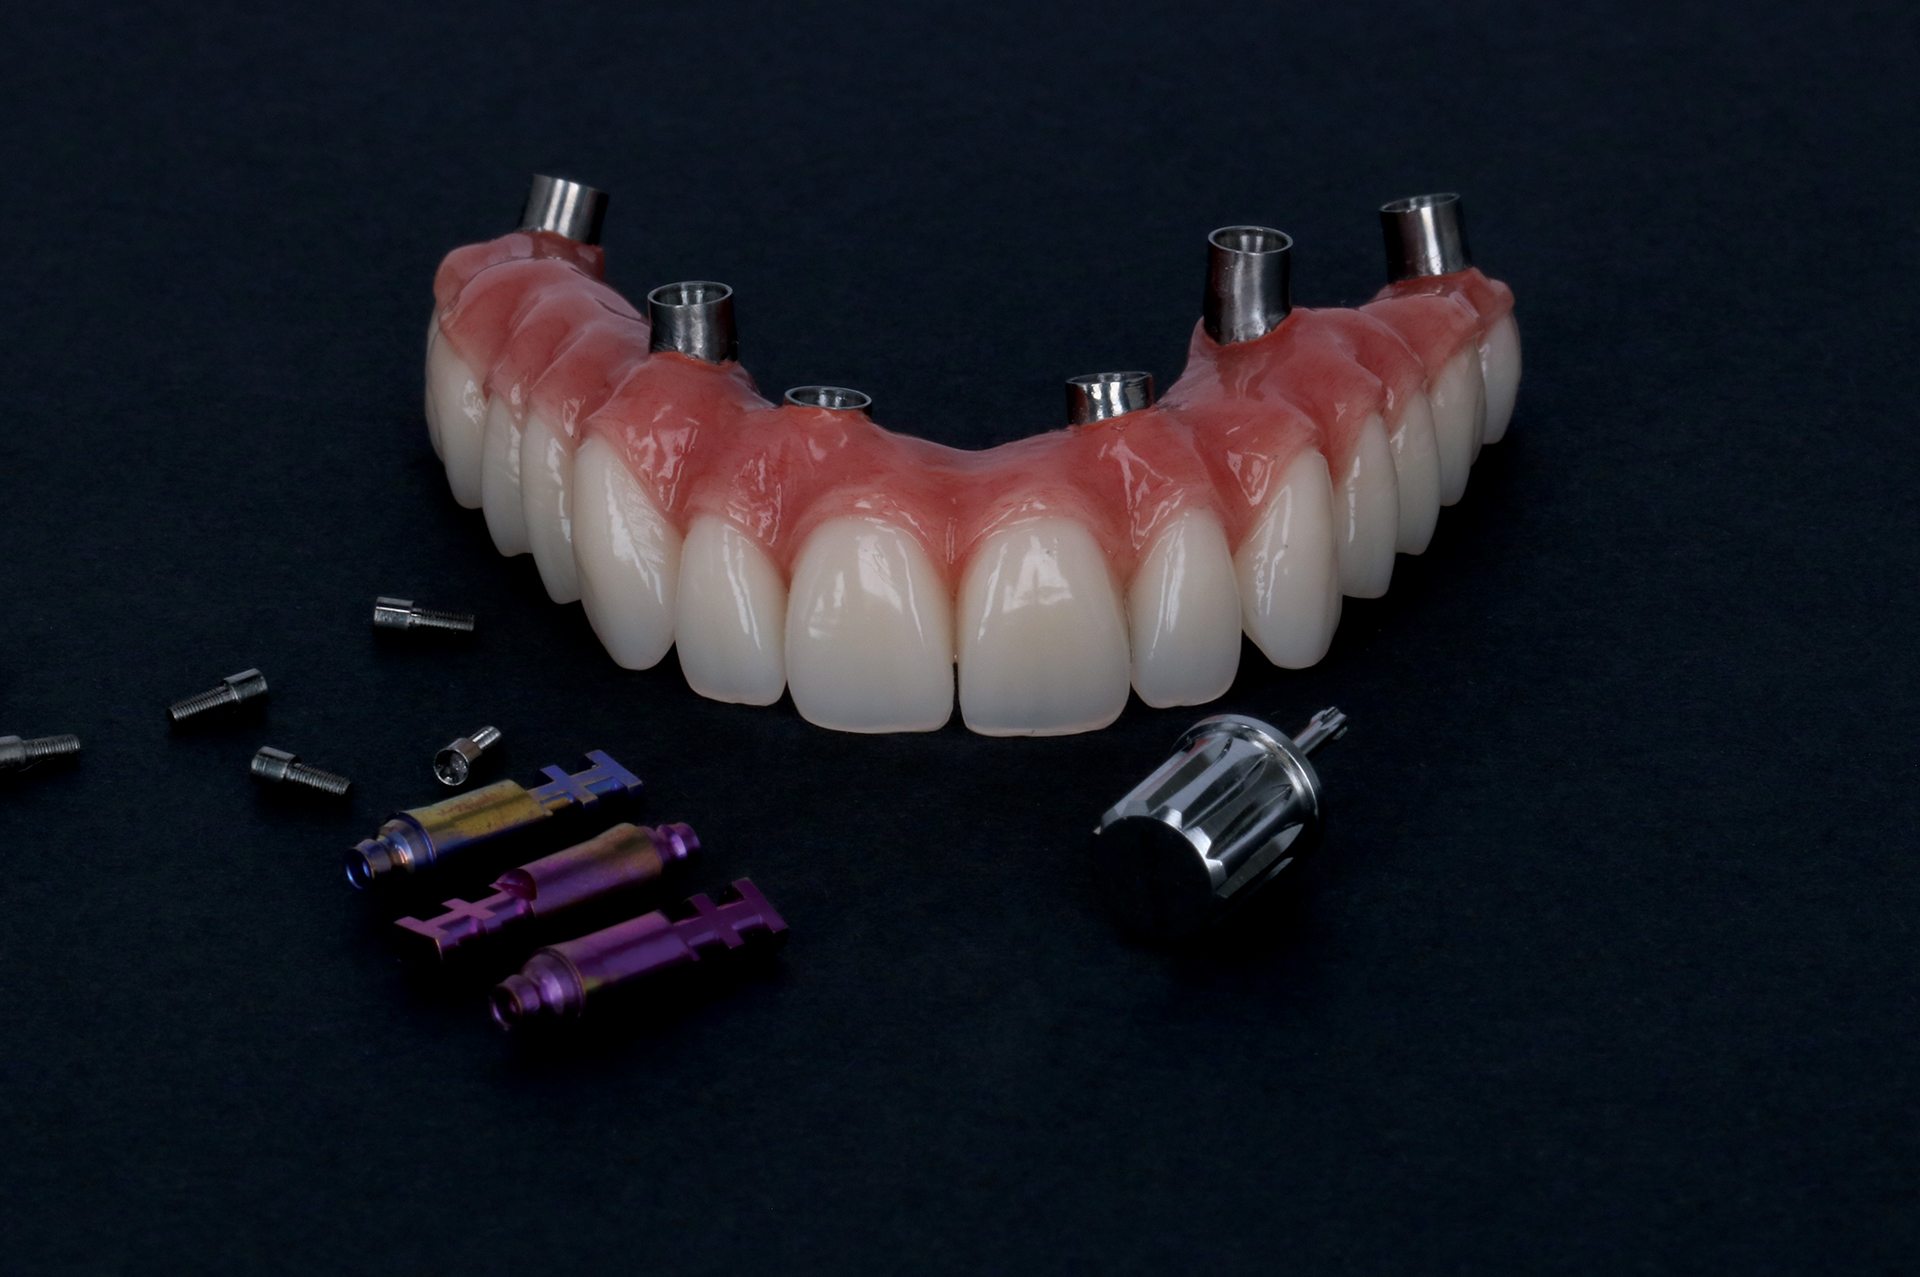 product photography for prosthetic and orthodontic company - product photography - Pixterior.com photography studio